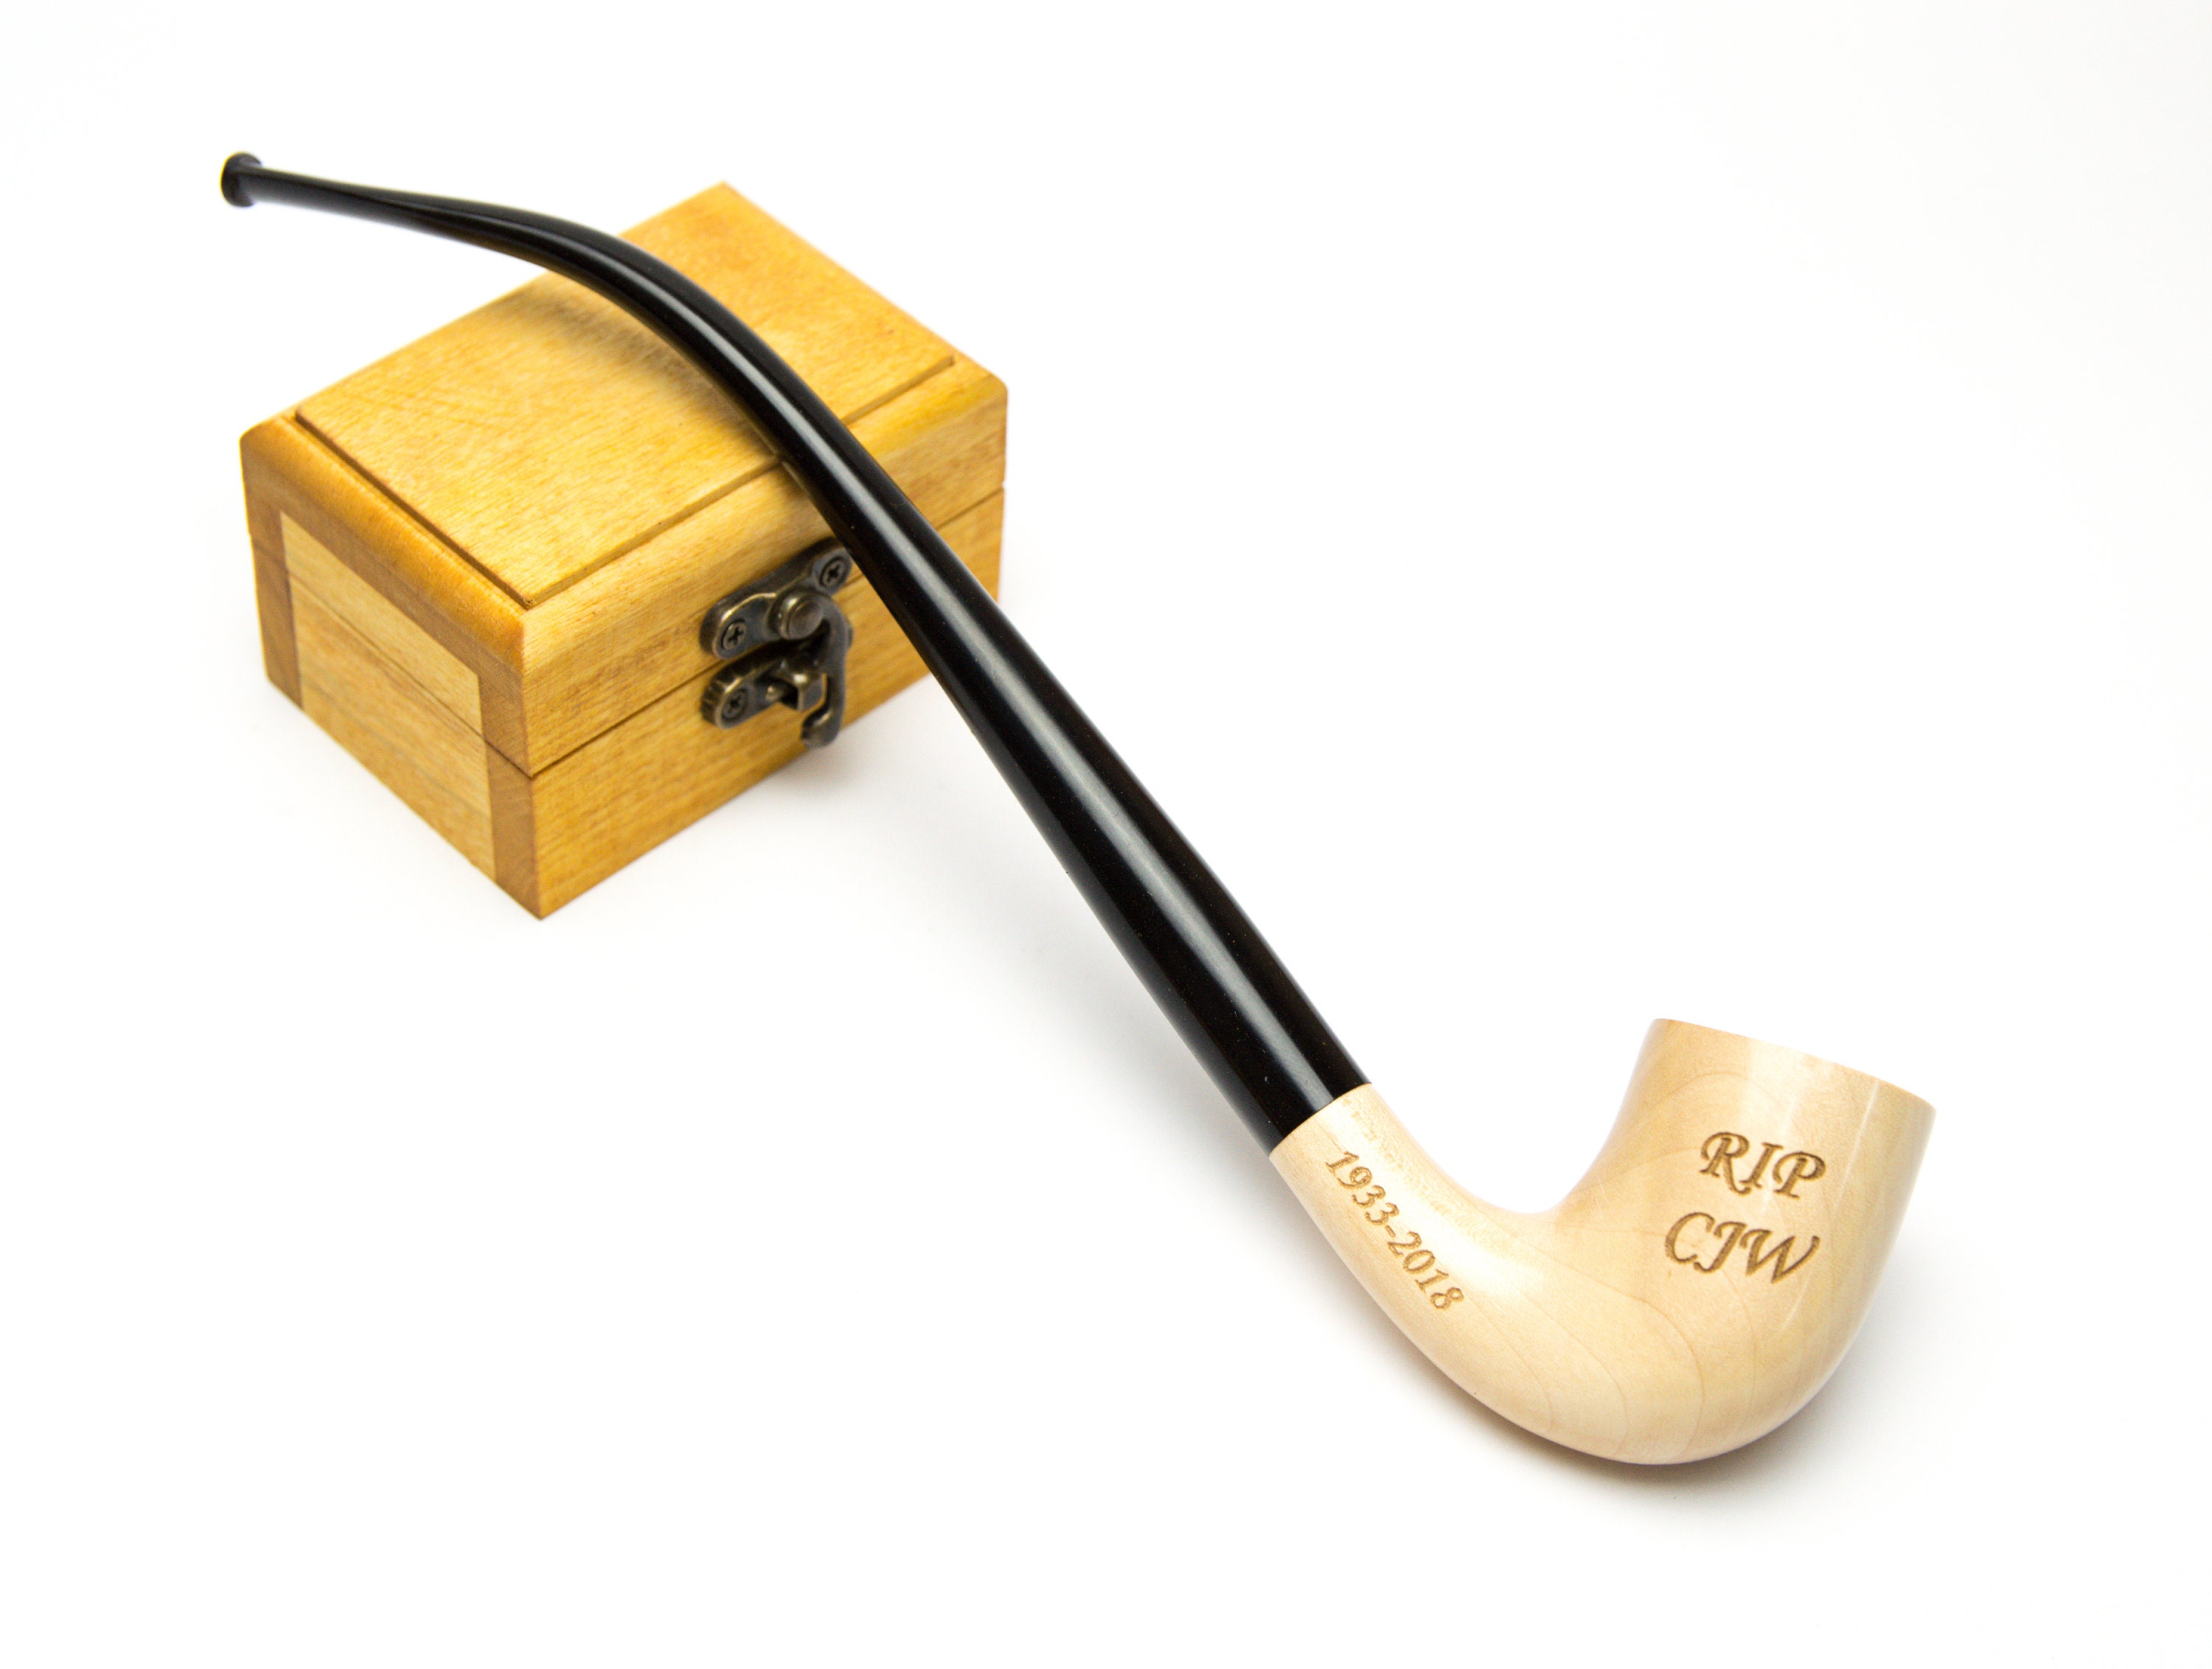  CIGAR PIPES - Original Tobacco Pipes and Smoking Pipes : Health  & Household